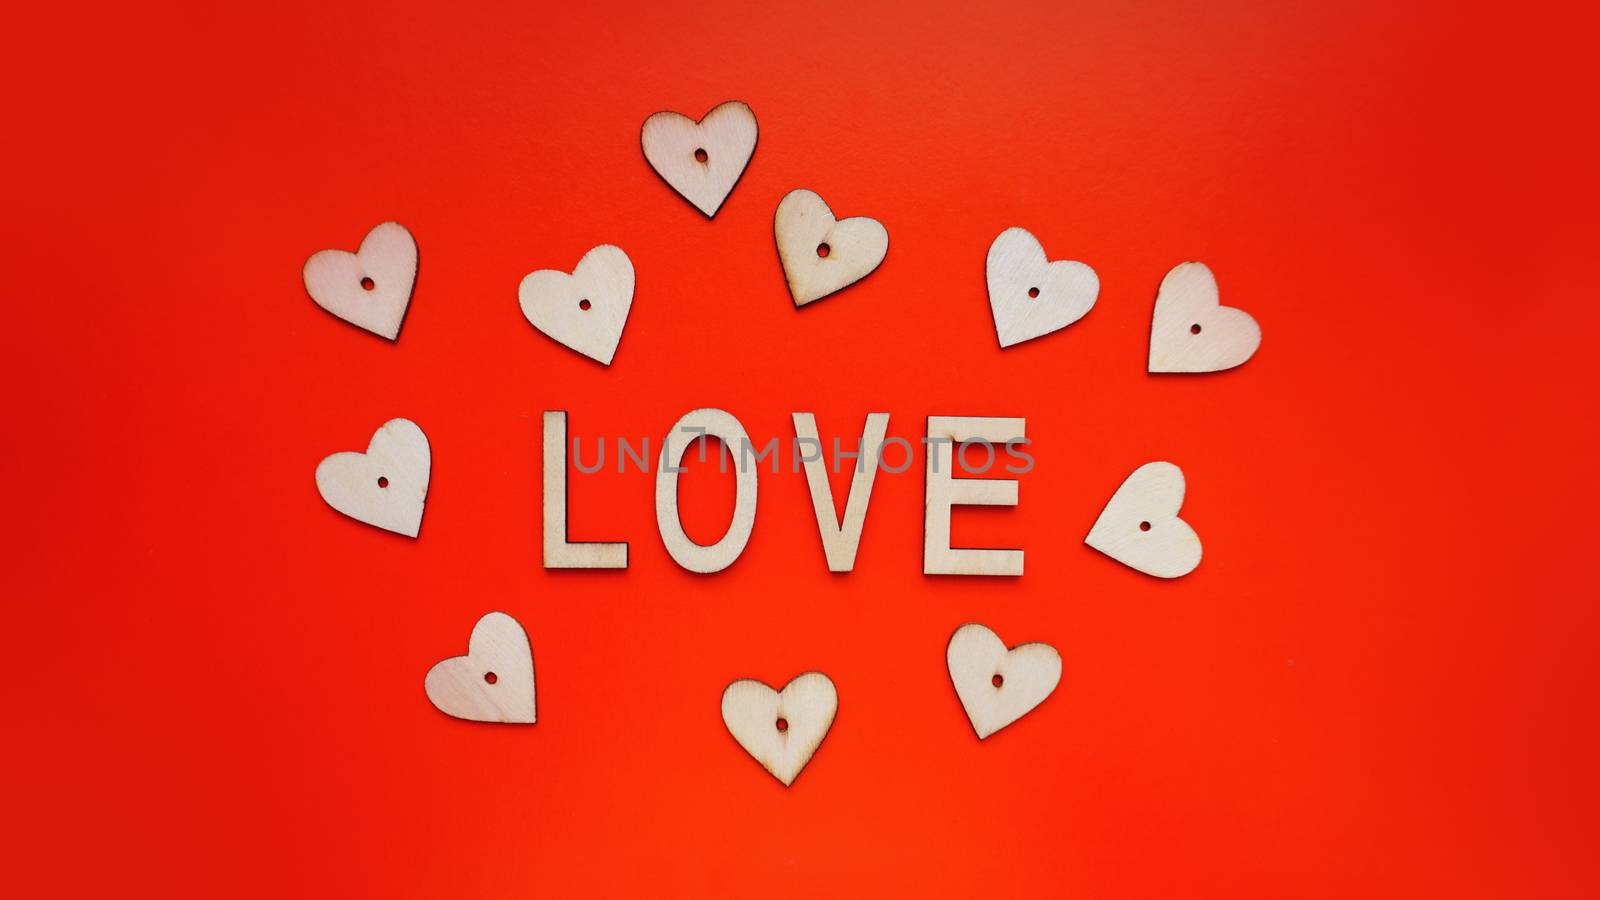 Valentines Day background with red hearts and letters love - made of wood on red by natali_brill